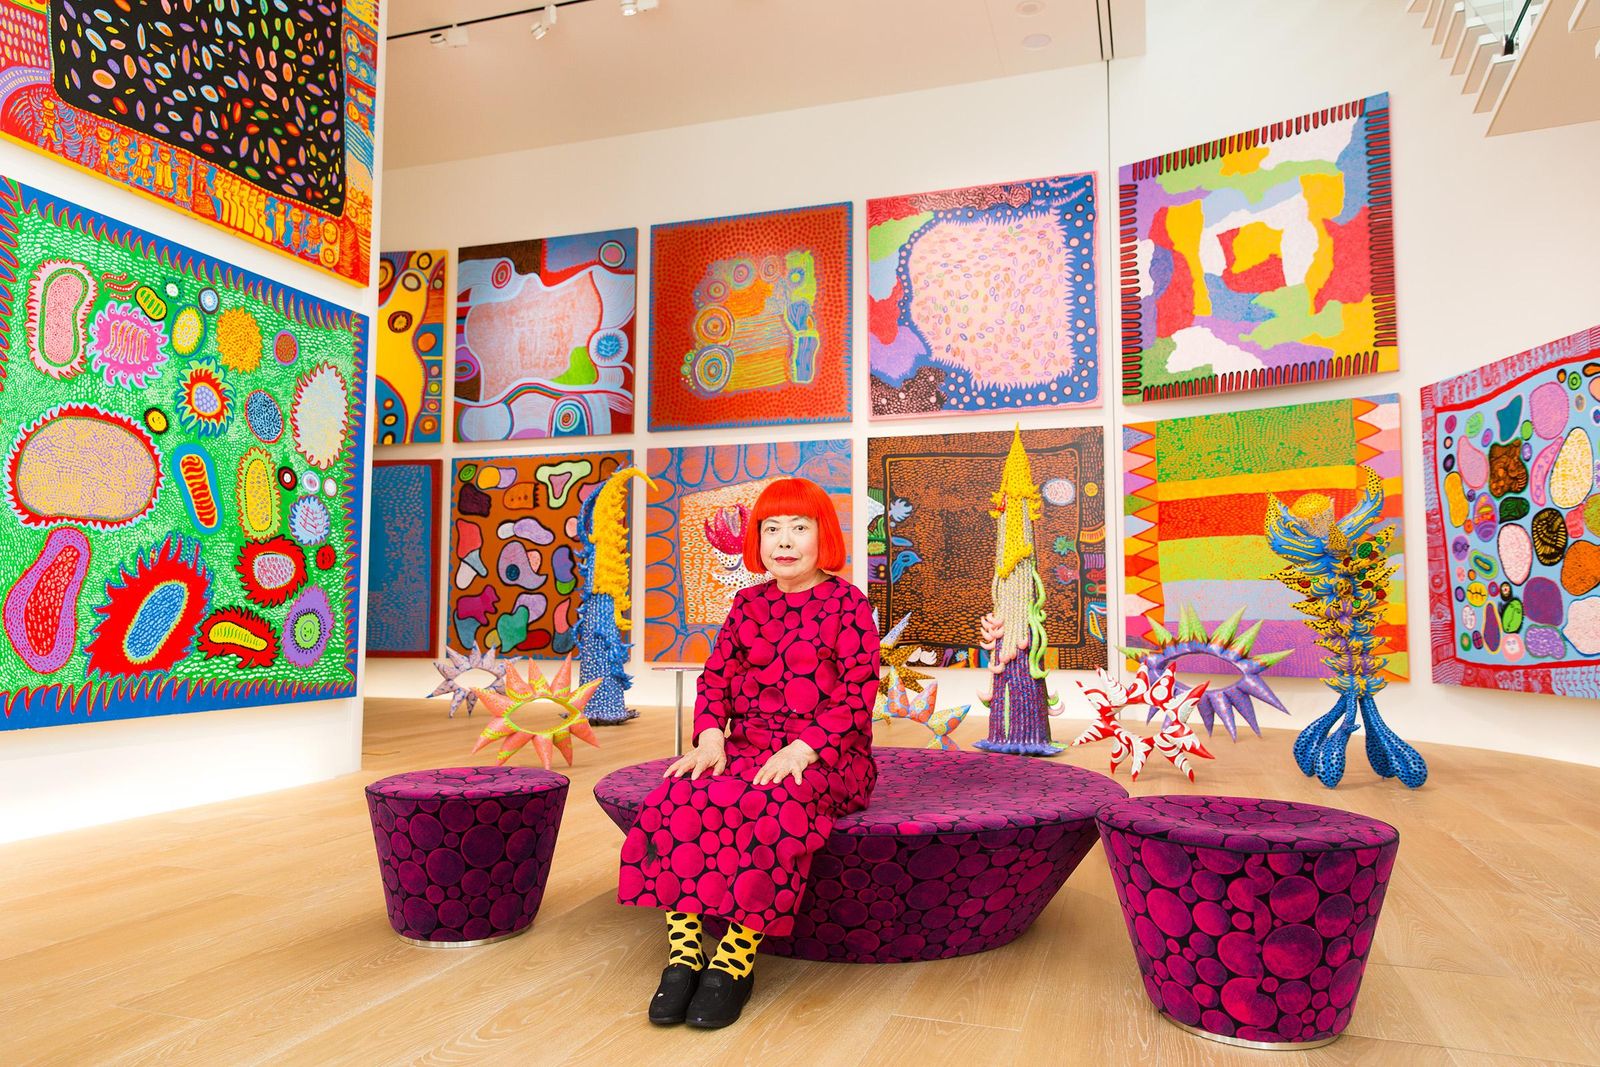 Icons before Instagram: How Yayoi Kusama changed fashion as we know it